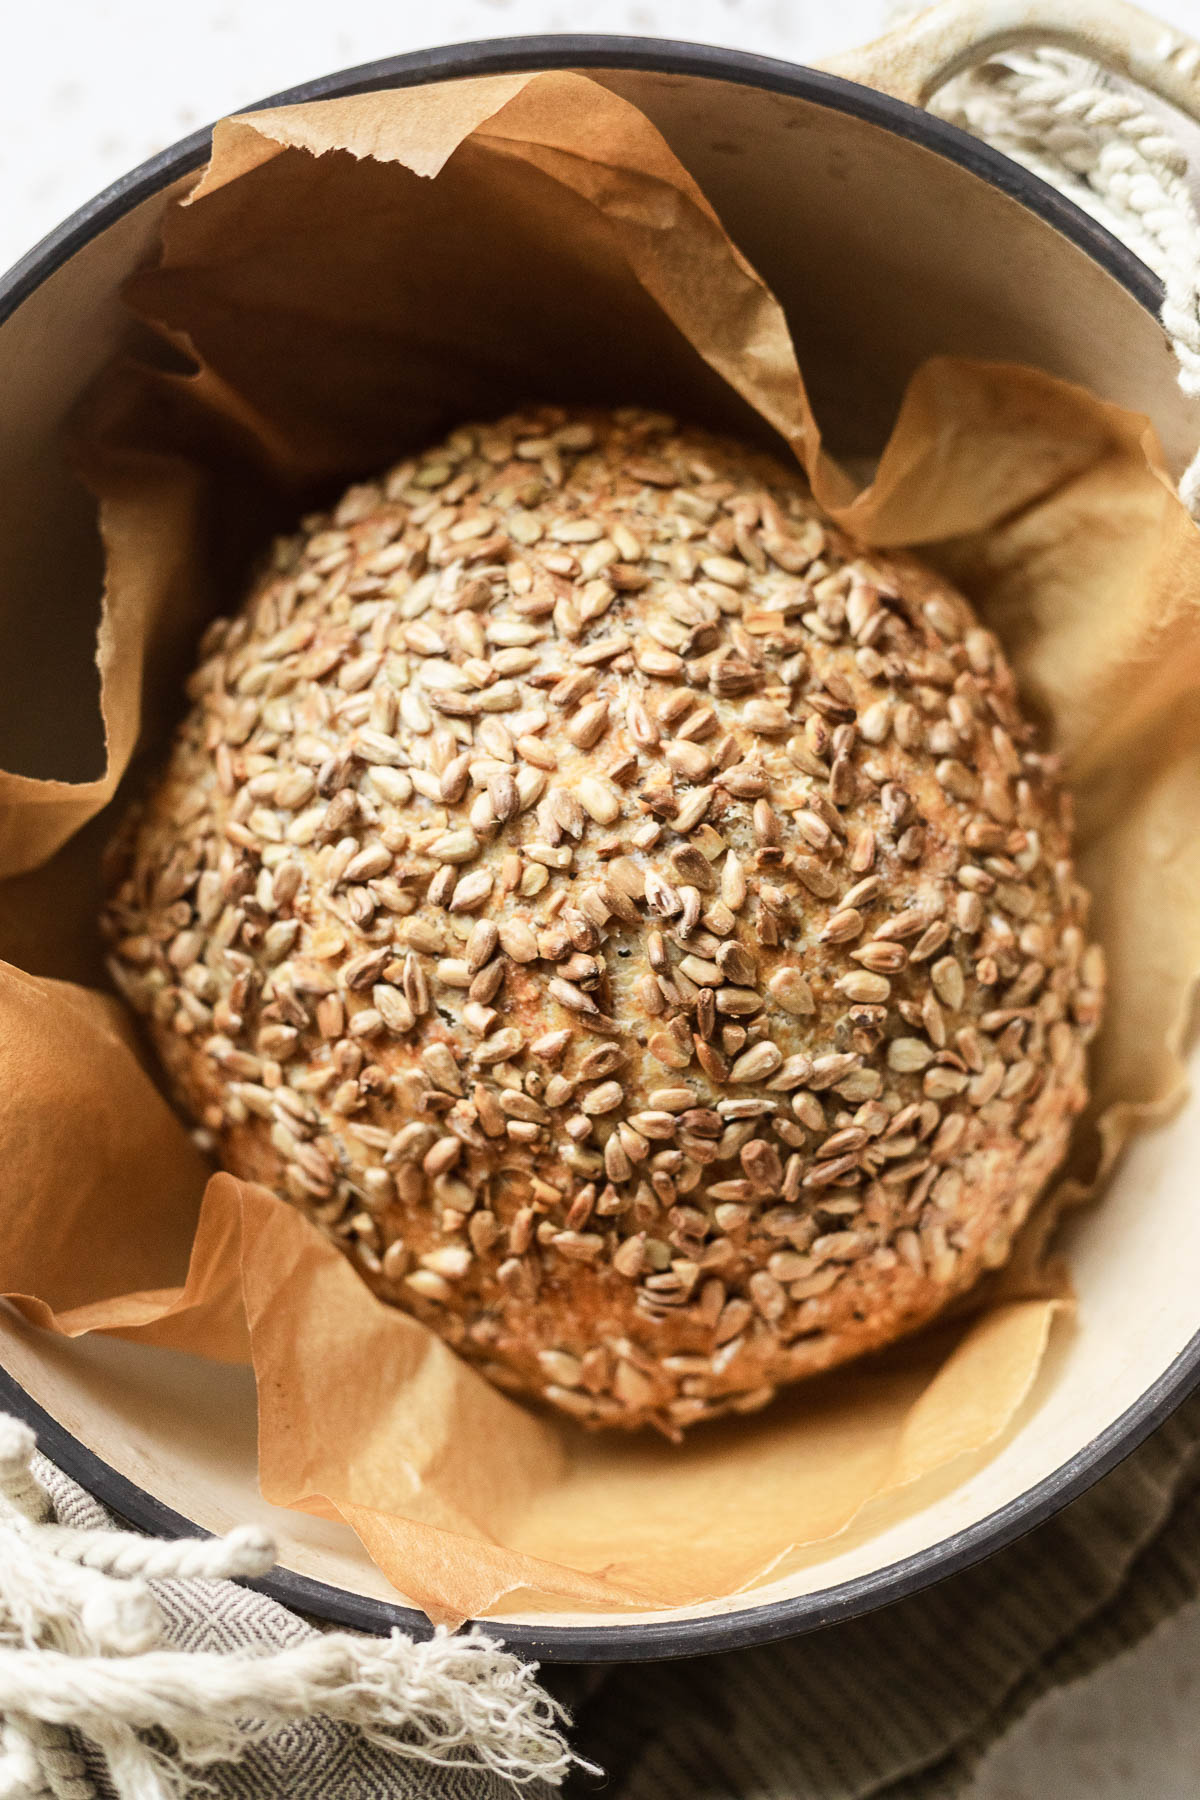 A loaf of sourdough bread in a pot with sunflower seeds.